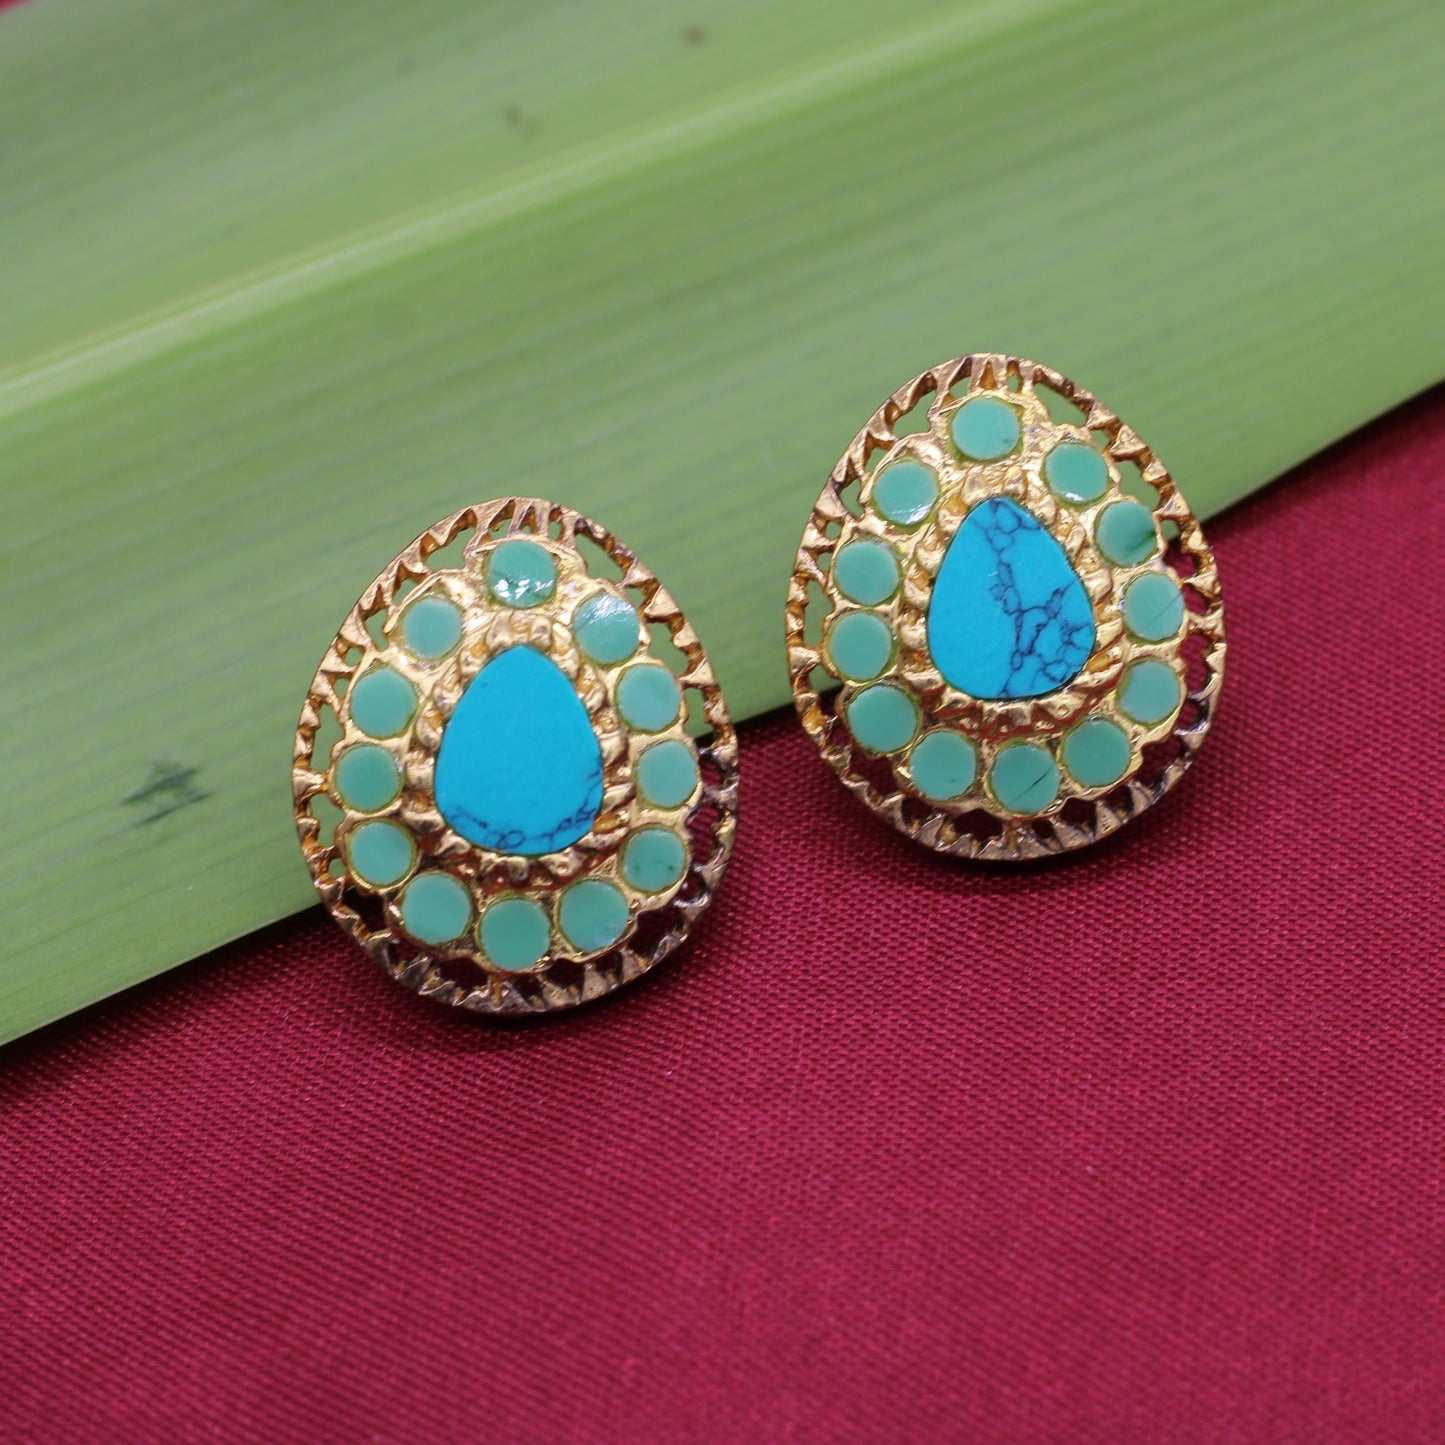 EARRINGS in 92.5 STERLING SILVER WITH Turquoise stones